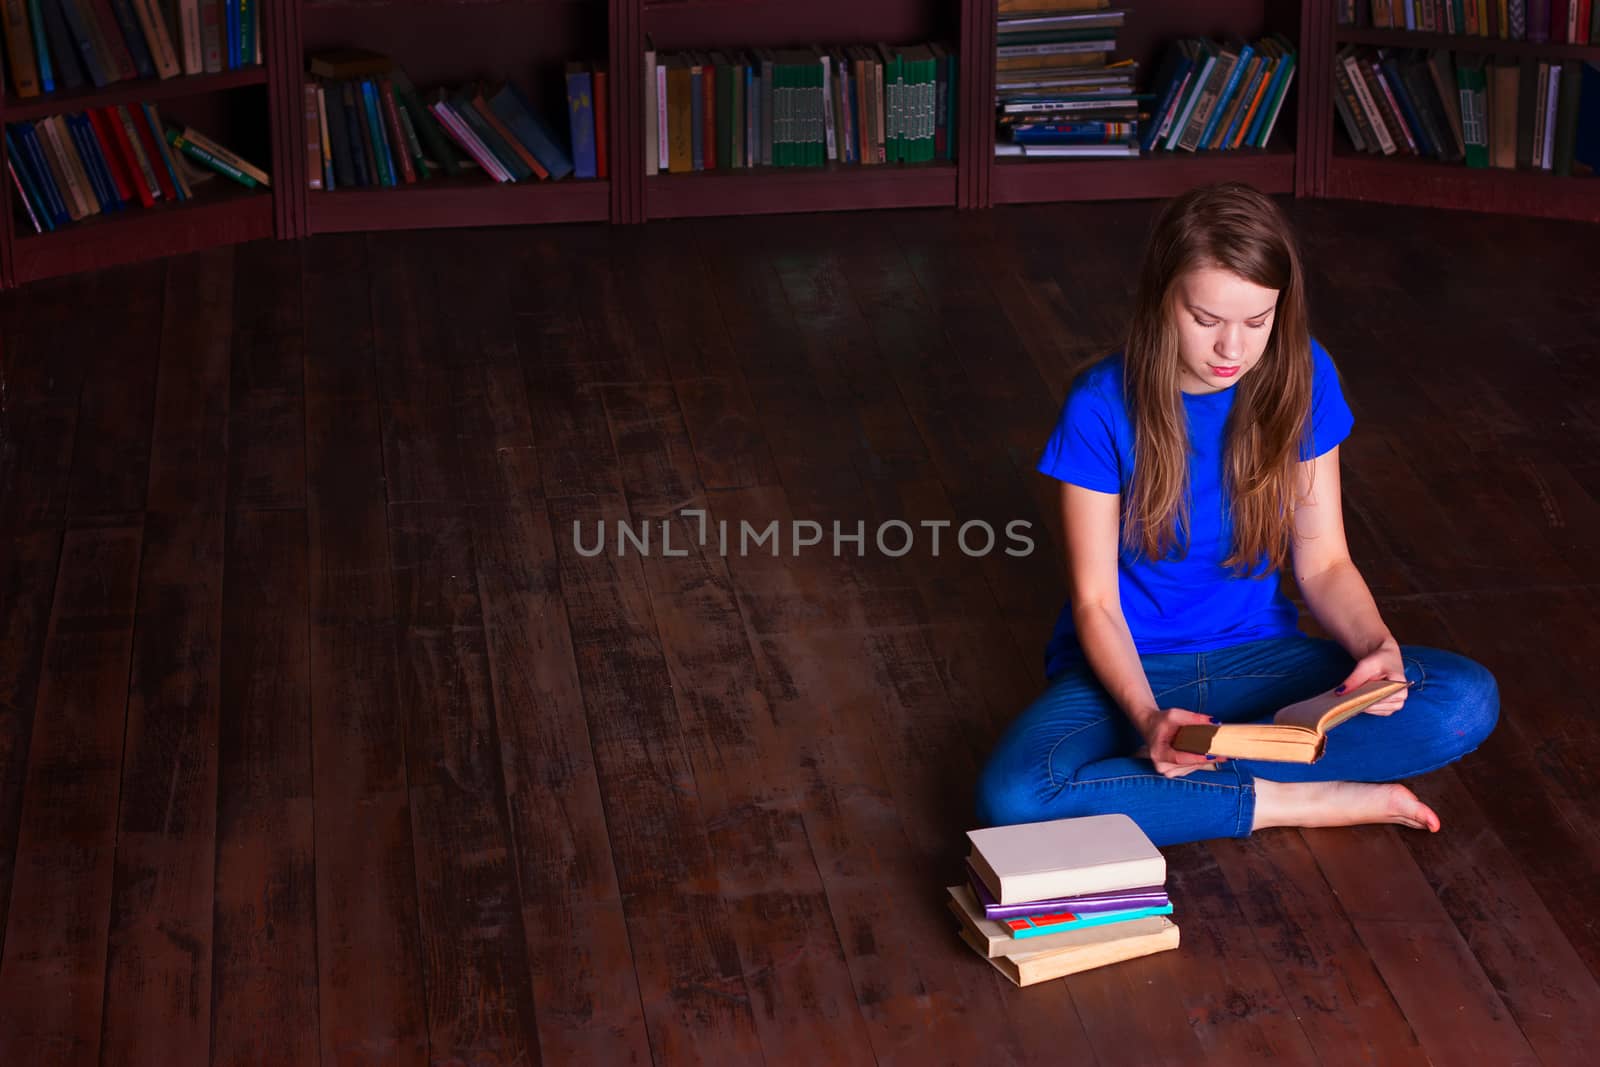 A girl sits on the floor in the library